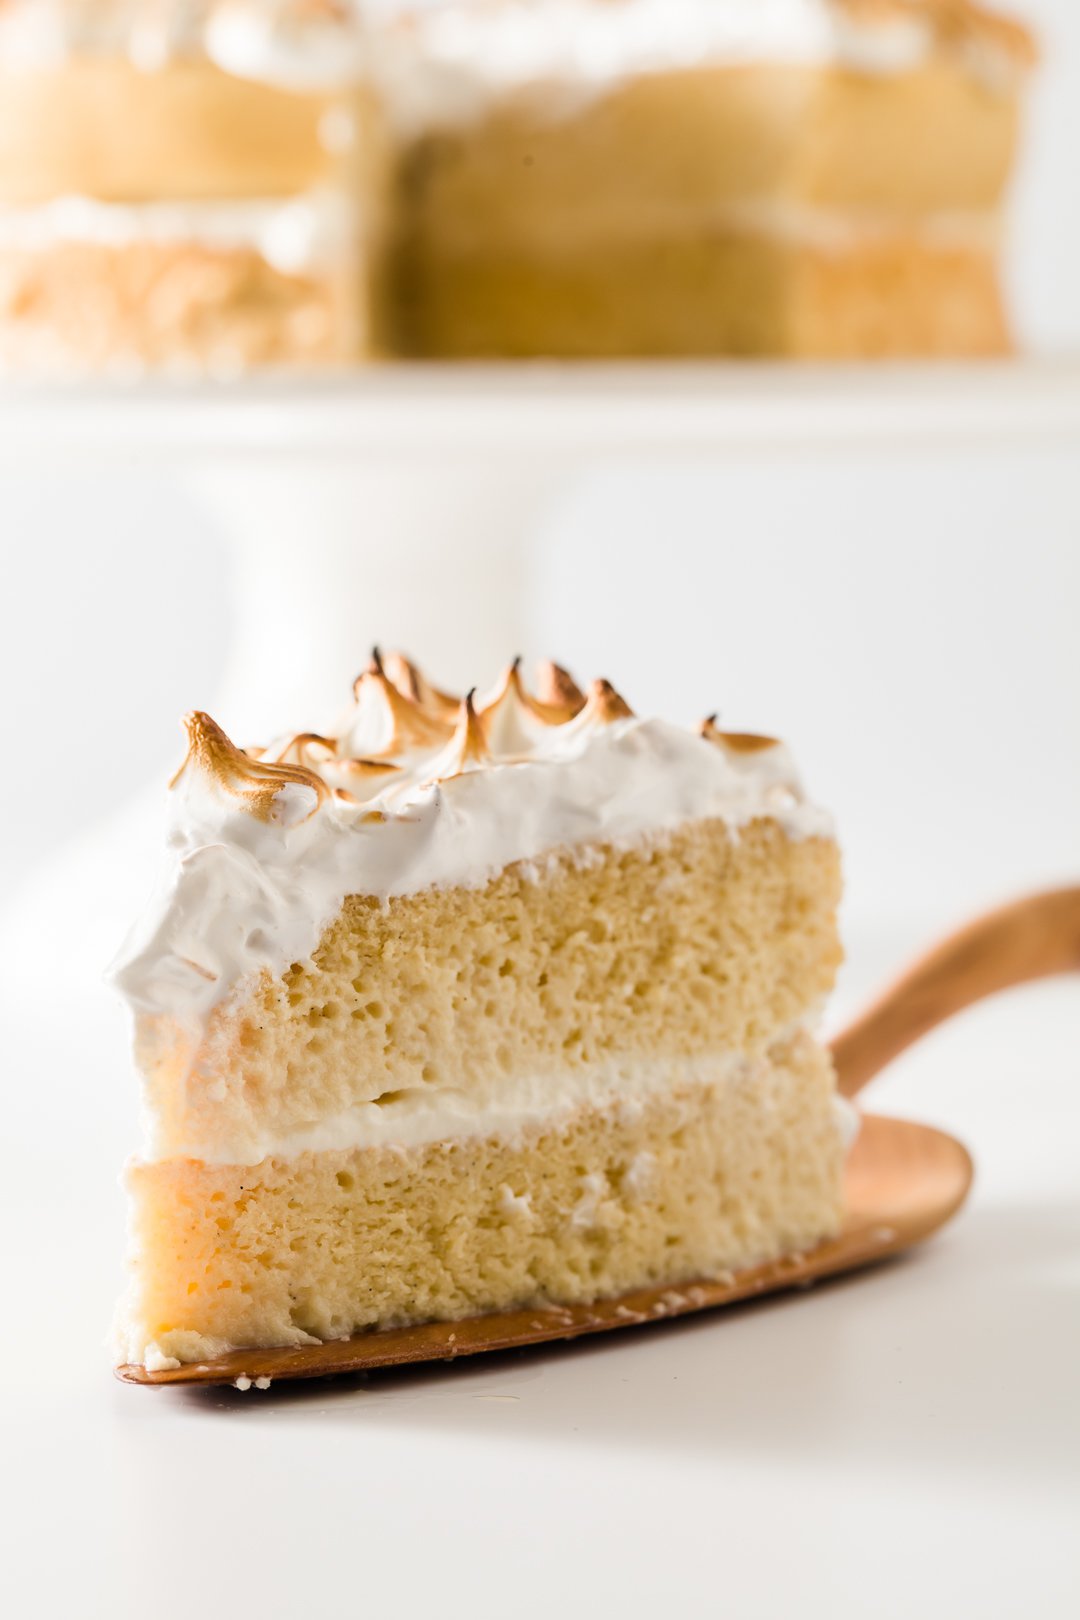 Slice of tres leches cake